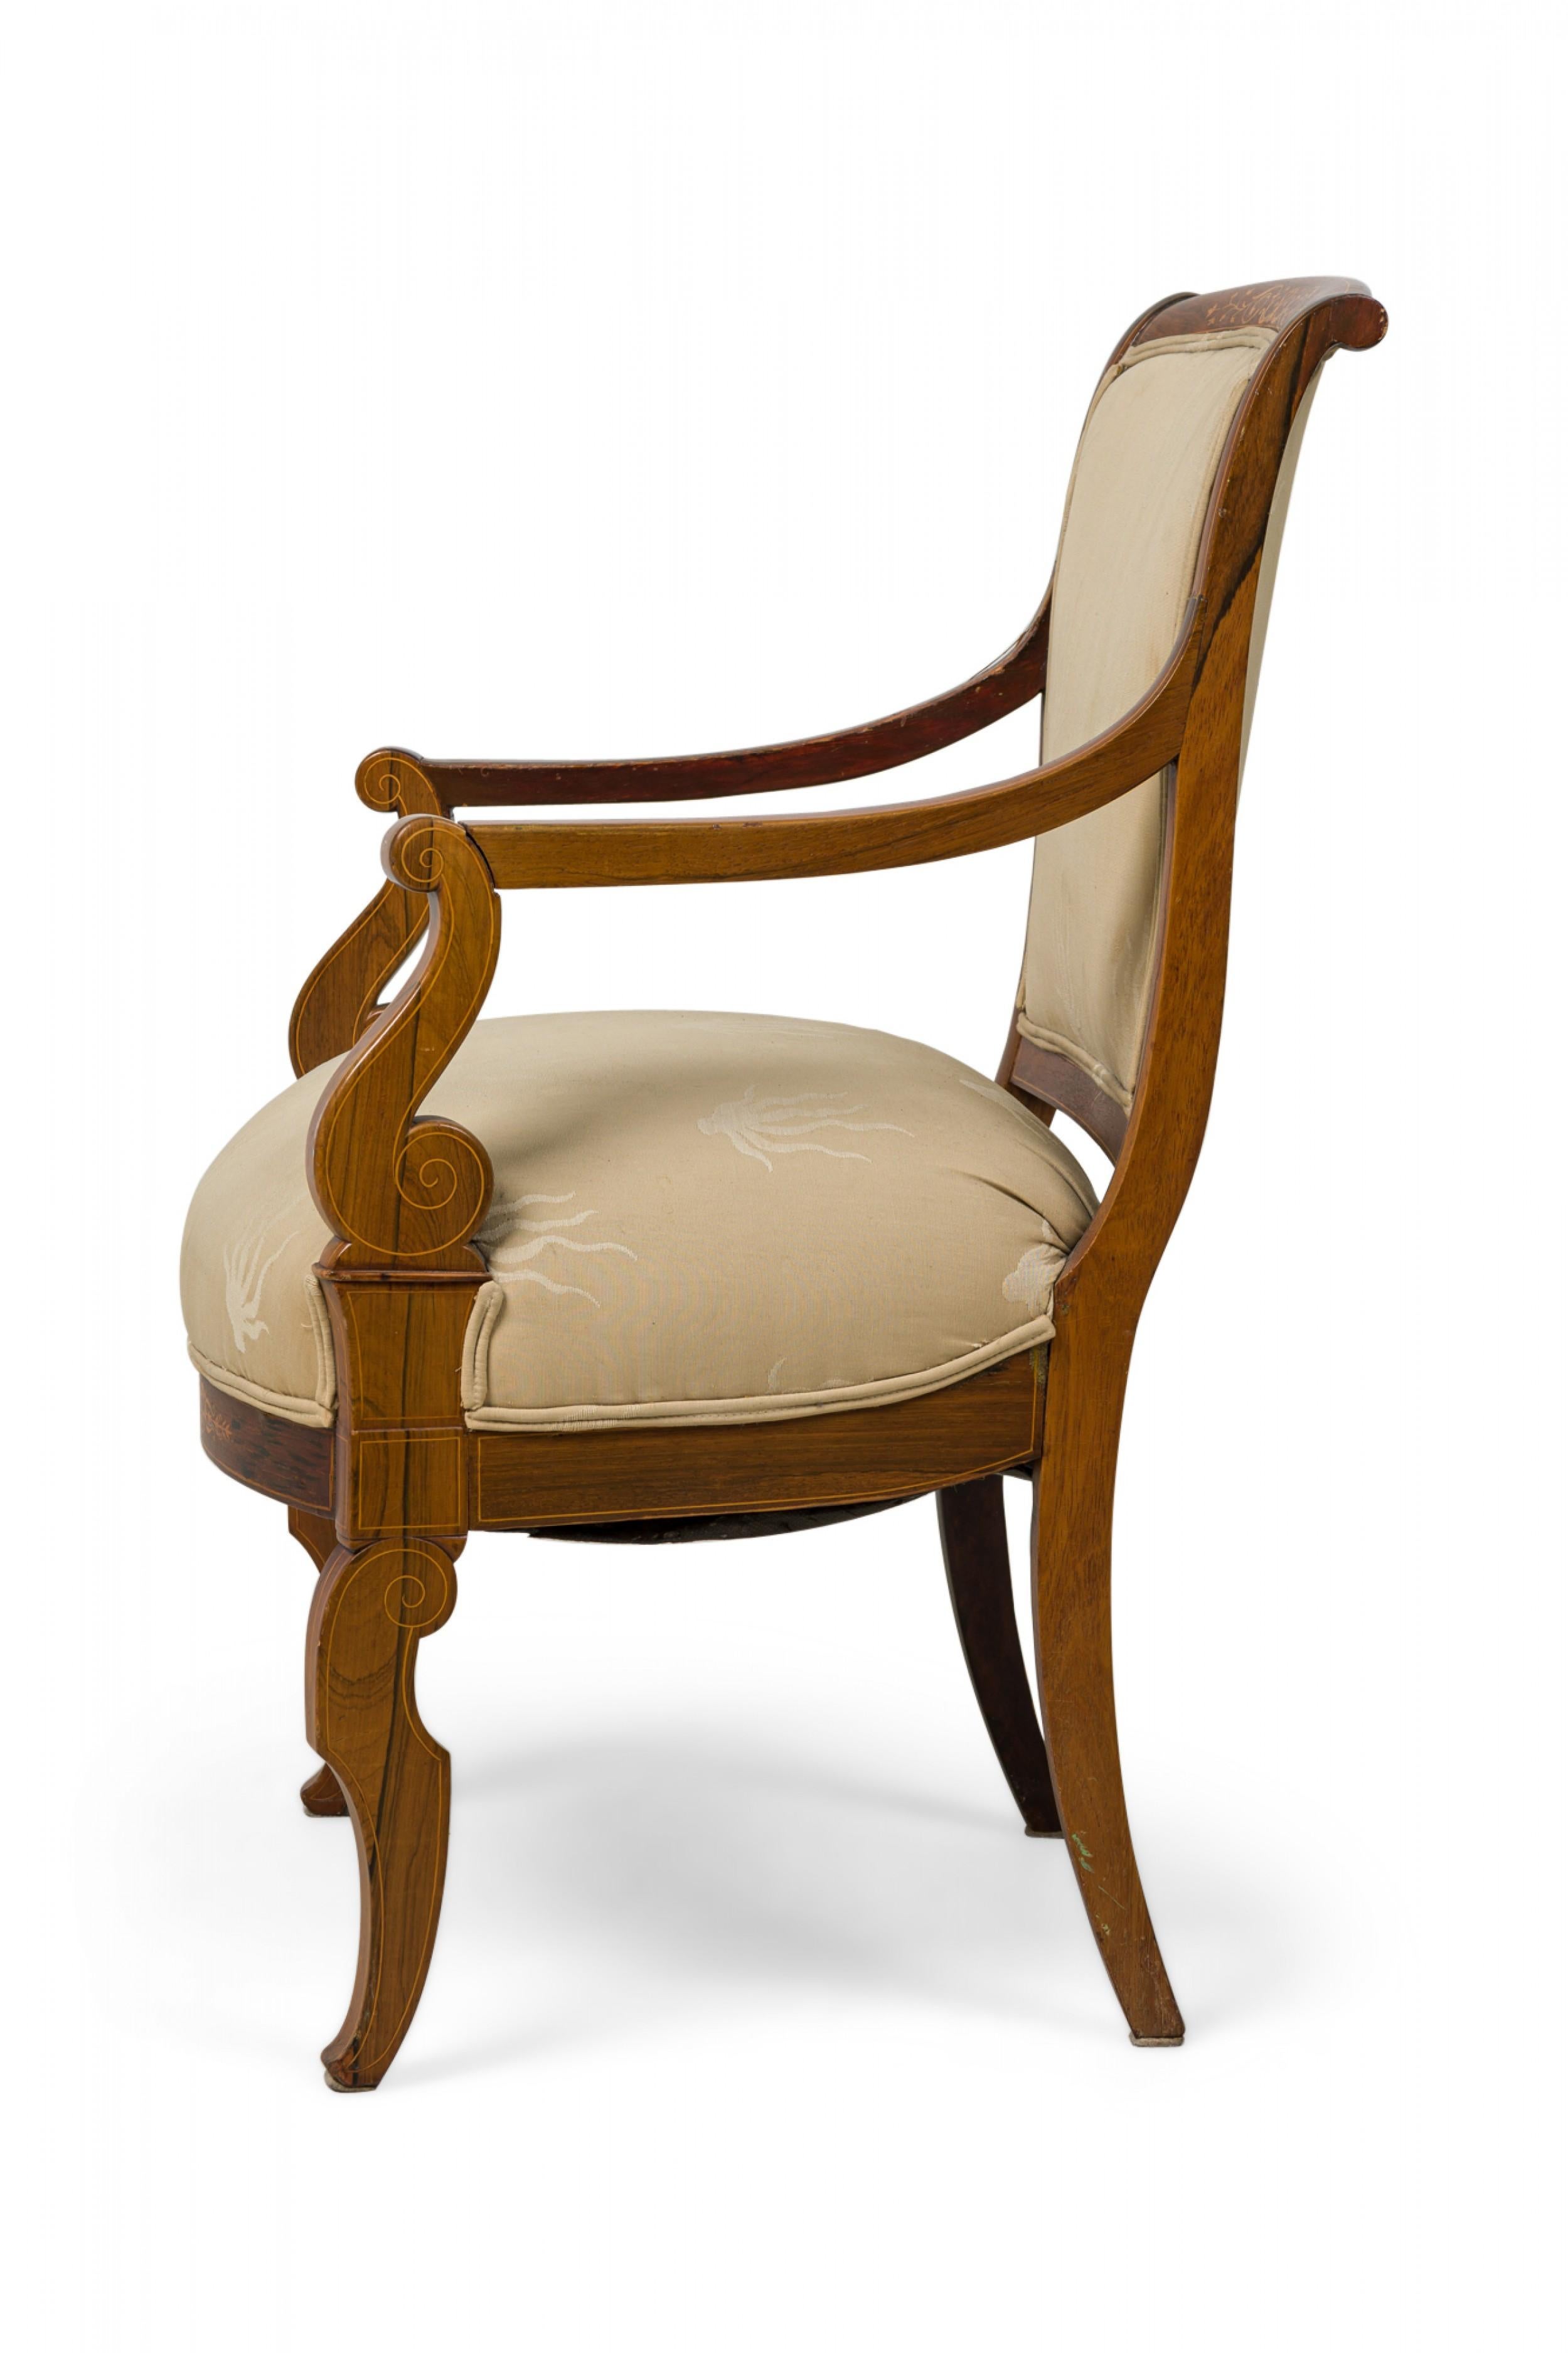 Inlay French Charles X Inlaid Mahogany and Walnut Open Armchair in Beige Upholstery For Sale